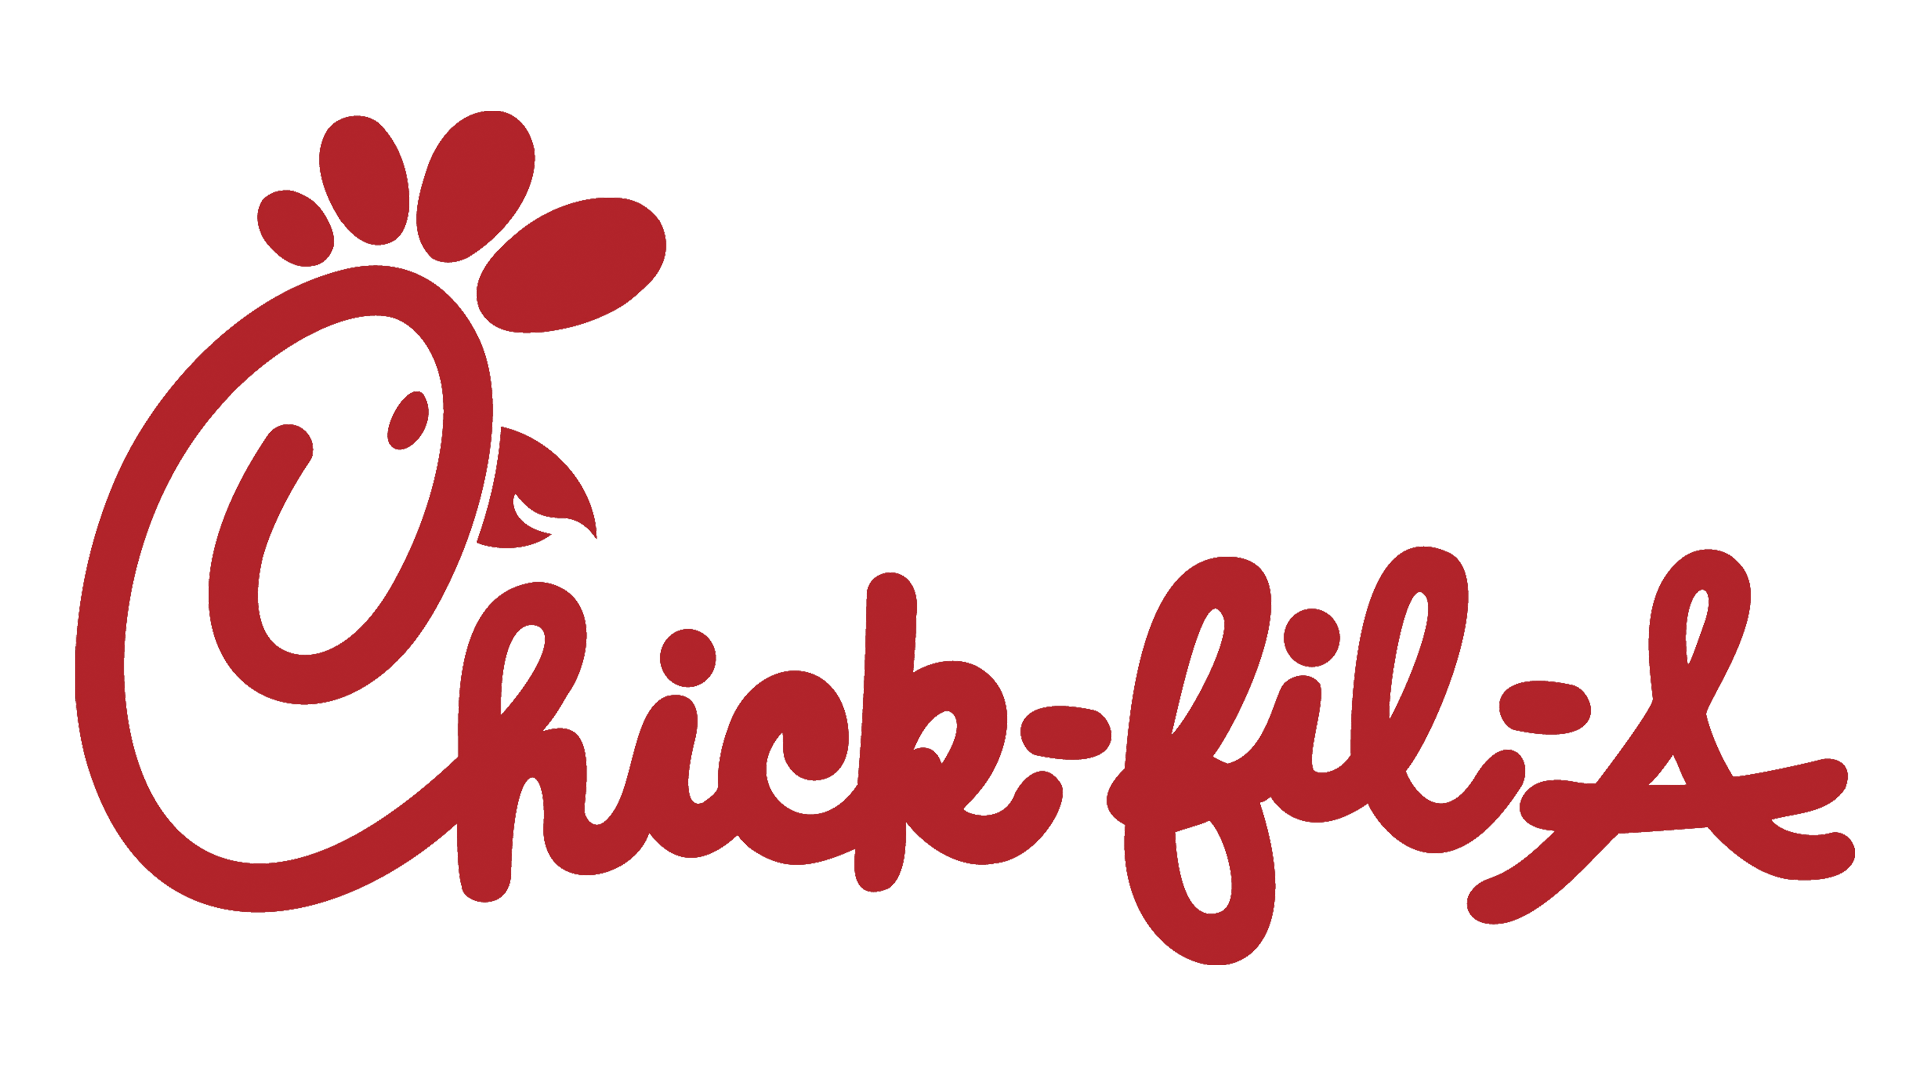 Chickfila.png